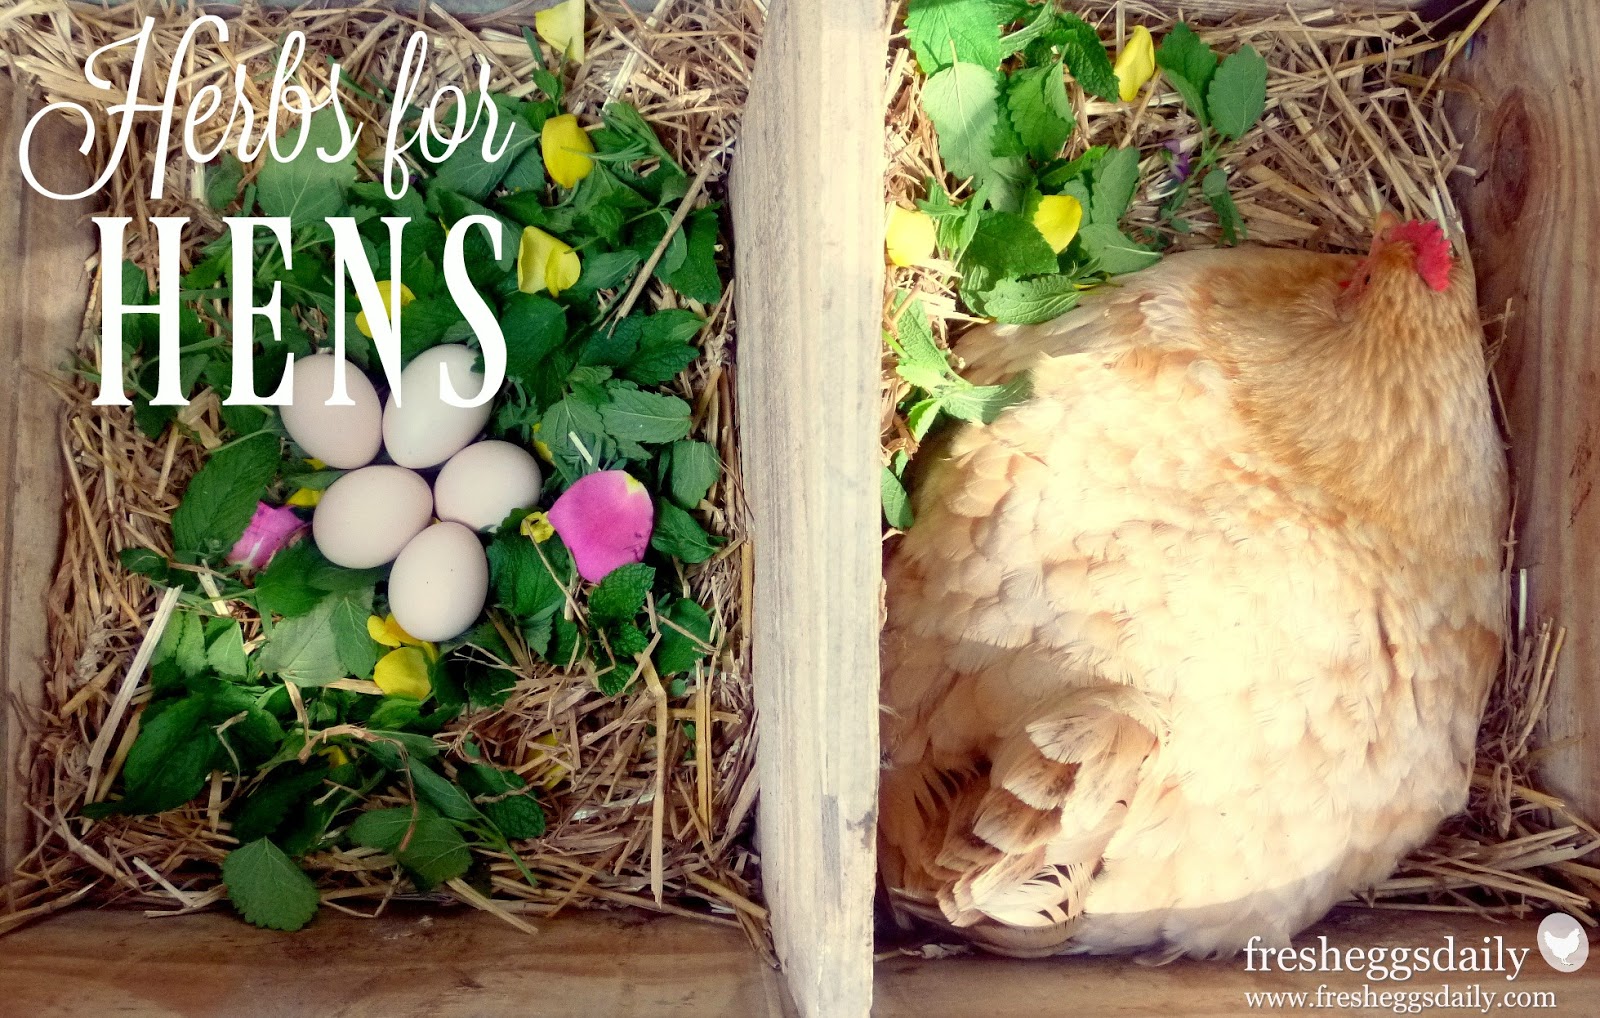 Herbs for Hens - Add